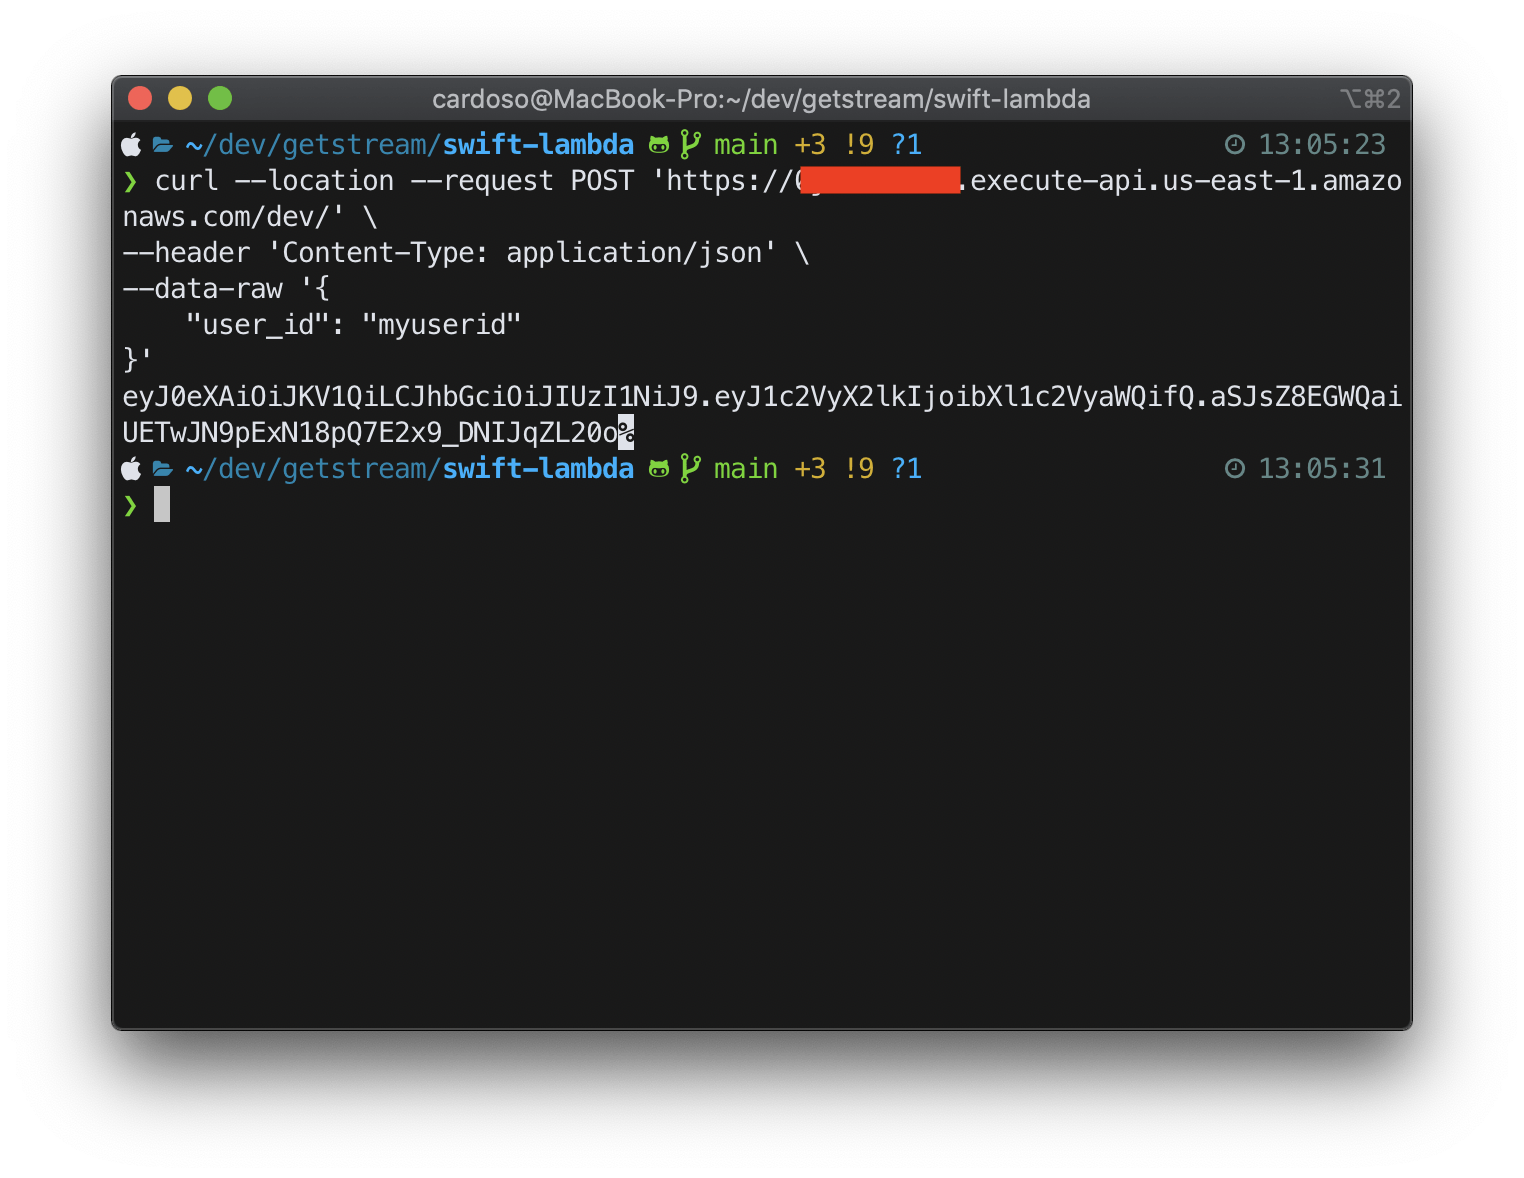 Image shows curl command running and a JWT output